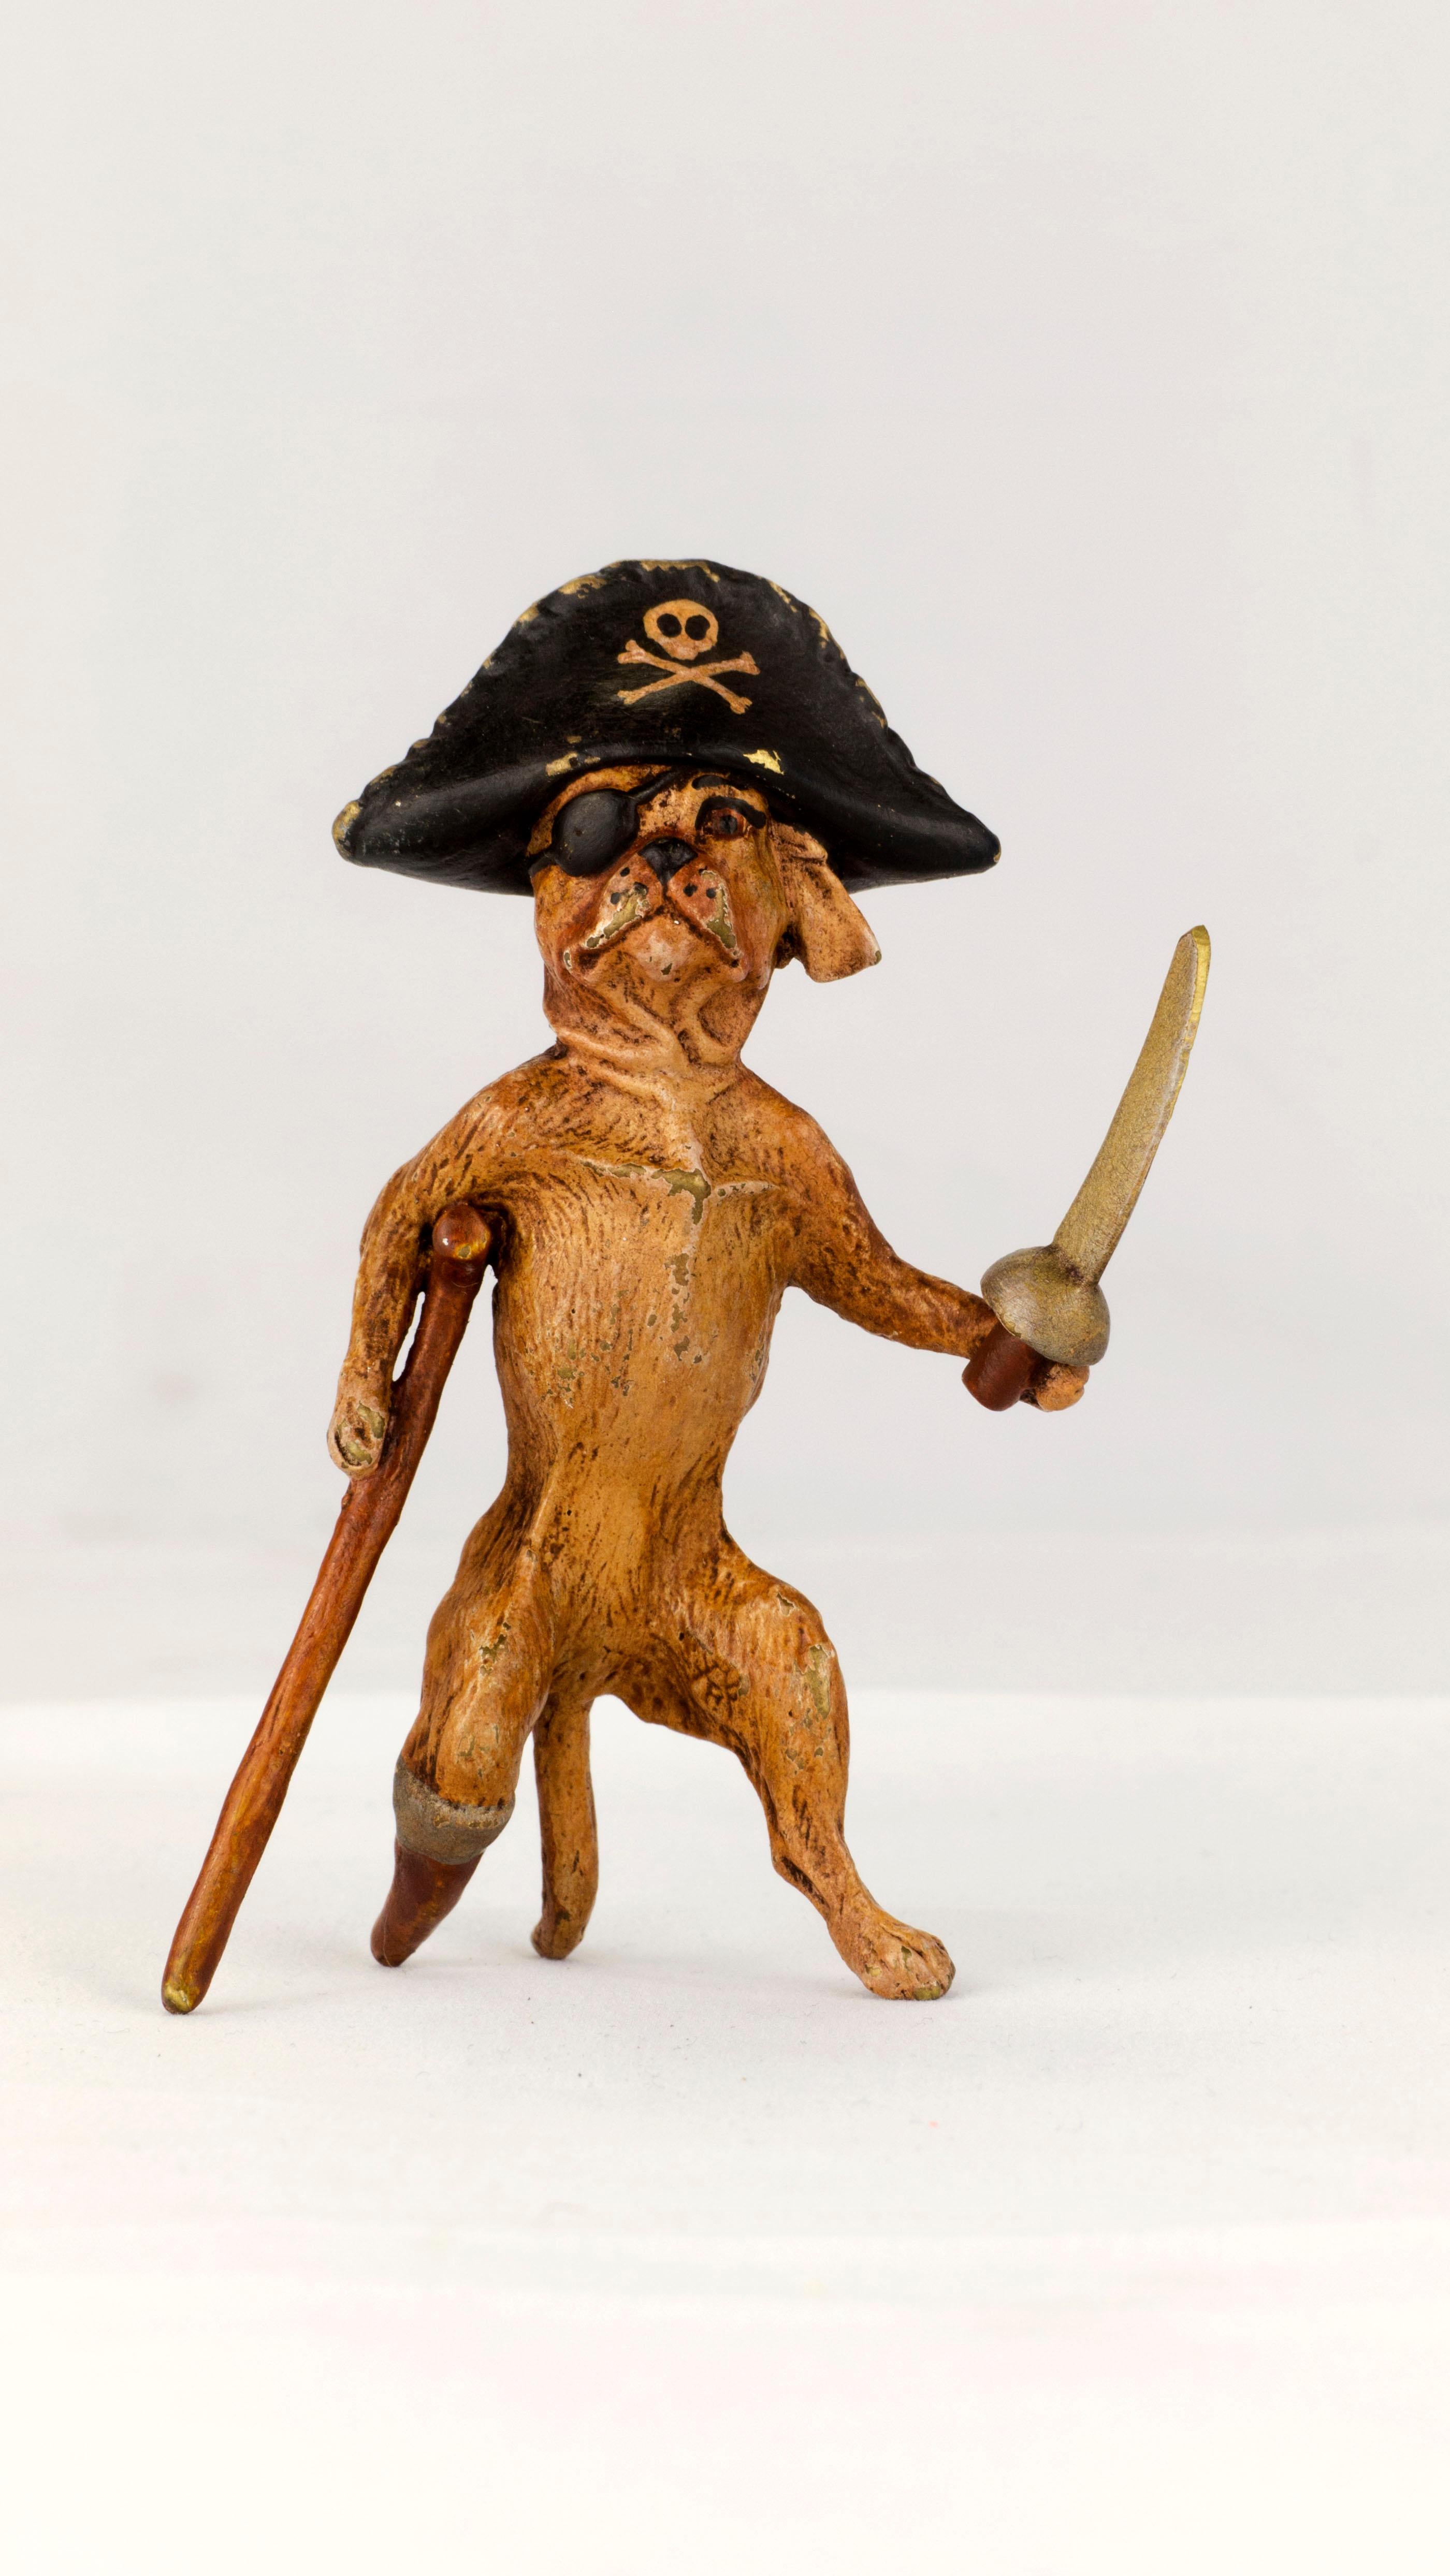 Franz Bergman - Standing Pirate Peg Leg Pug dog - Marked with a B in the Urn Cold Painted Bronze, Brown Dog with a Black and Silver Hat, a silver colored Sword, and a yellow head band. Made in Vienna Austria, circa 1900s MEASURES: 4.5 inches long An